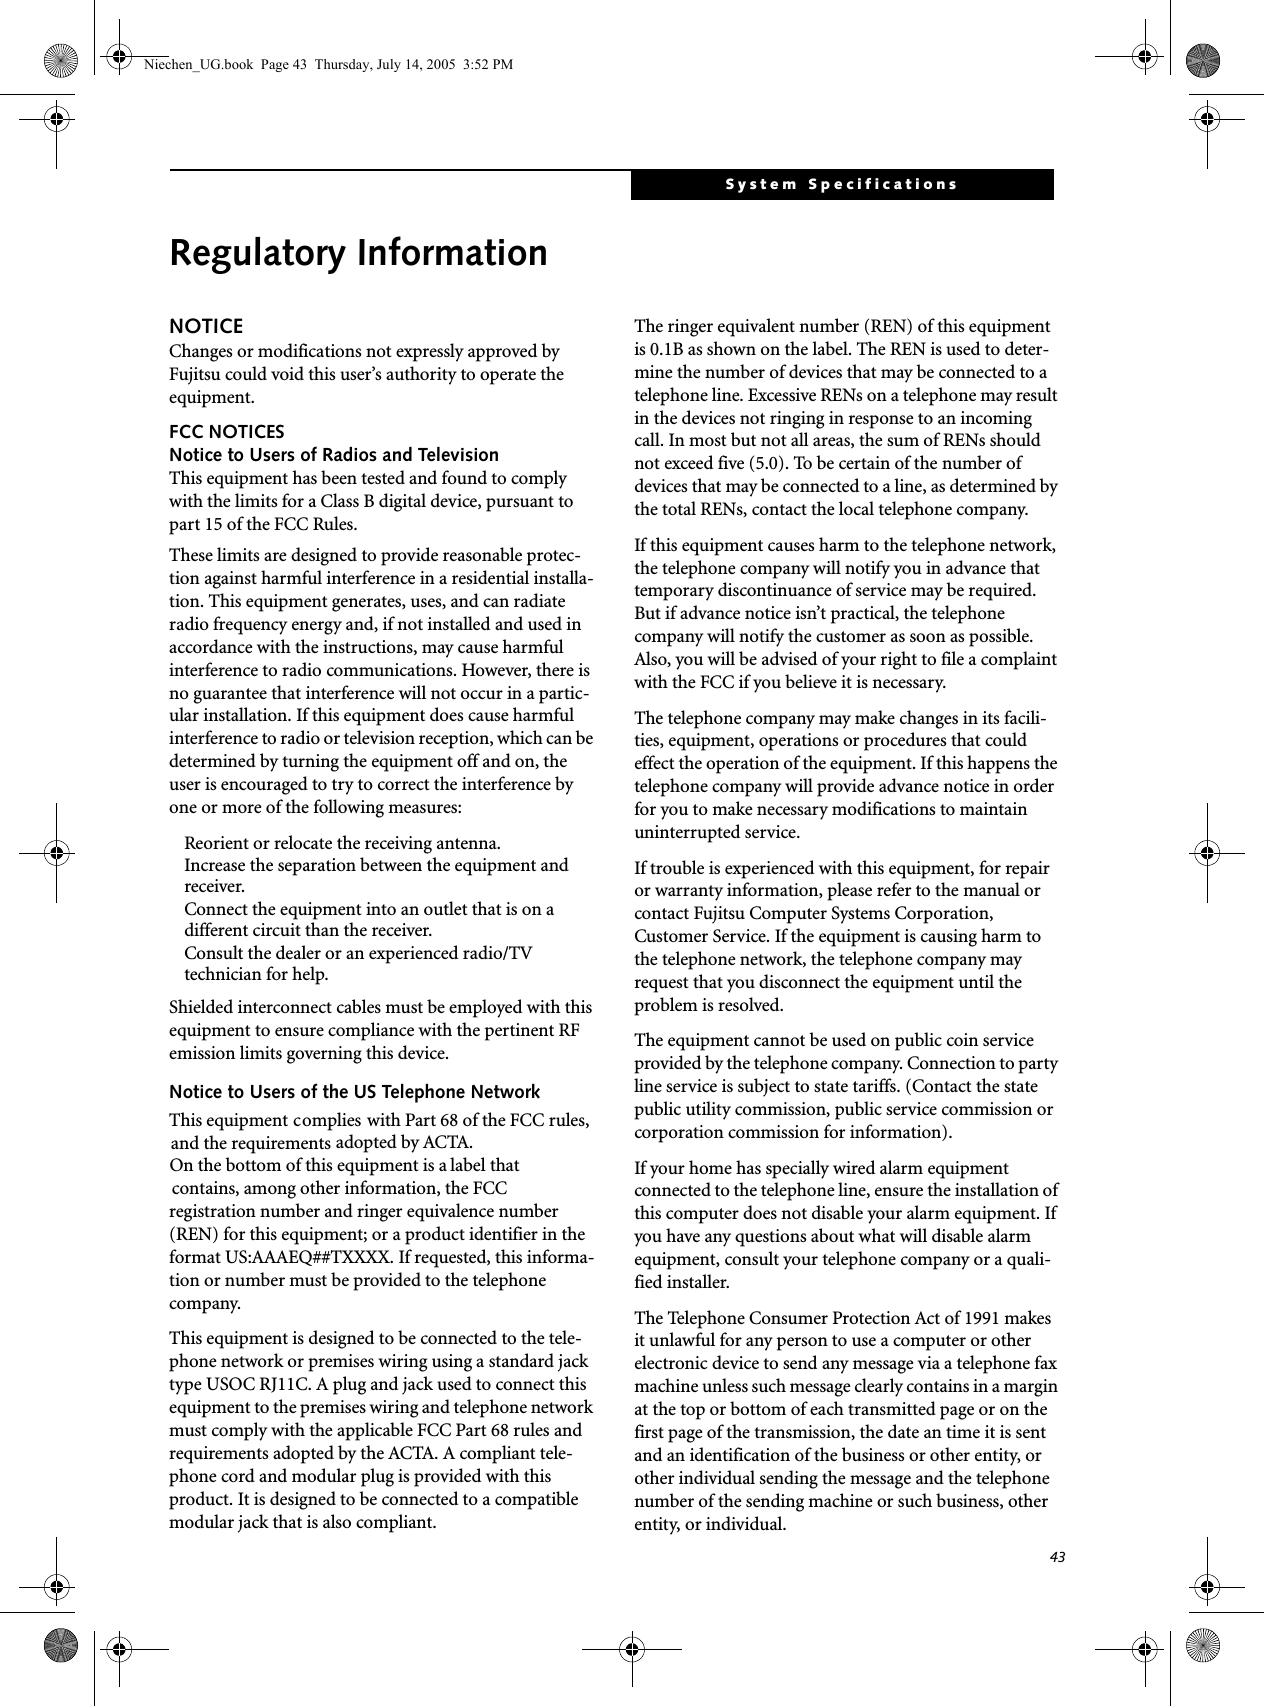 43System SpecificationsRegulatory InformationNOTICEChanges or modifications not expressly approved by Fujitsu could void this user’s authority to operate the equipment.FCC NOTICESNotice to Users of Radios and TelevisionThis equipment has been tested and found to comply with the limits for a Class B digital device, pursuant to part 15 of the FCC Rules.These limits are designed to provide reasonable protec-tion against harmful interference in a residential installa-tion. This equipment generates, uses, and can radiate radio frequency energy and, if not installed and used in accordance with the instructions, may cause harmful interference to radio communications. However, there is no guarantee that interference will not occur in a partic-ular installation. If this equipment does cause harmful interference to radio or television reception, which can be determined by turning the equipment off and on, the user is encouraged to try to correct the interference by one or more of the following measures:Reorient or relocate the receiving antenna.Increase the separation between the equipment and receiver.Connect the equipment into an outlet that is on a different circuit than the receiver.Consult the dealer or an experienced radio/TVtechnician for help.Shielded interconnect cables must be employed with this equipment to ensure compliance with the pertinent RF emission limits governing this device. Notice to Users of the US Telephone NetworkThis equipment    complies with Part 68 of the FCC rules, and the requirements adopted by ACTA. On the bottom of this equipment is a label that contains, among other information, the FCC registration number and ringer equivalence number (REN) for this equipment; or a product identifier in the format US:AAAEQ##TXXXX. If requested, this informa-tion or number must be provided to the telephone company.This equipment is designed to be connected to the tele-phone network or premises wiring using a standard jack type USOC RJ11C. A plug and jack used to connect this equipment to the premises wiring and telephone network must comply with the applicable FCC Part 68 rules and requirements adopted by the ACTA. A compliant tele-phone cord and modular plug is provided with this product. It is designed to be connected to a compatible modular jack that is also compliant.The ringer equivalent number (REN) of this equipment is 0.1B as shown on the label. The REN is used to deter-mine the number of devices that may be connected to a telephone line. Excessive RENs on a telephone may result in the devices not ringing in response to an incoming call. In most but not all areas, the sum of RENs should not exceed five (5.0). To be certain of the number of devices that may be connected to a line, as determined by the total RENs, contact the local telephone company. If this equipment causes harm to the telephone network, the telephone company will notify you in advance that temporary discontinuance of service may be required. But if advance notice isn’t practical, the telephone company will notify the customer as soon as possible. Also, you will be advised of your right to file a complaint with the FCC if you believe it is necessary.The telephone company may make changes in its facili-ties, equipment, operations or procedures that could effect the operation of the equipment. If this happens the telephone company will provide advance notice in order for you to make necessary modifications to maintain uninterrupted service. If trouble is experienced with this equipment, for repair or warranty information, please refer to the manual or contact Fujitsu Computer Systems Corporation, Customer Service. If the equipment is causing harm to the telephone network, the telephone company may request that you disconnect the equipment until the problem is resolved.The equipment cannot be used on public coin service provided by the telephone company. Connection to party line service is subject to state tariffs. (Contact the state public utility commission, public service commission or corporation commission for information). If your home has specially wired alarm equipment connected to the telephone line, ensure the installation of this computer does not disable your alarm equipment. If you have any questions about what will disable alarm equipment, consult your telephone company or a quali-fied installer.The Telephone Consumer Protection Act of 1991 makes it unlawful for any person to use a computer or other electronic device to send any message via a telephone fax machine unless such message clearly contains in a margin at the top or bottom of each transmitted page or on the first page of the transmission, the date an time it is sent and an identification of the business or other entity, or other individual sending the message and the telephone number of the sending machine or such business, other entity, or individual.Niechen_UG.book  Page 43  Thursday, July 14, 2005  3:52 PM